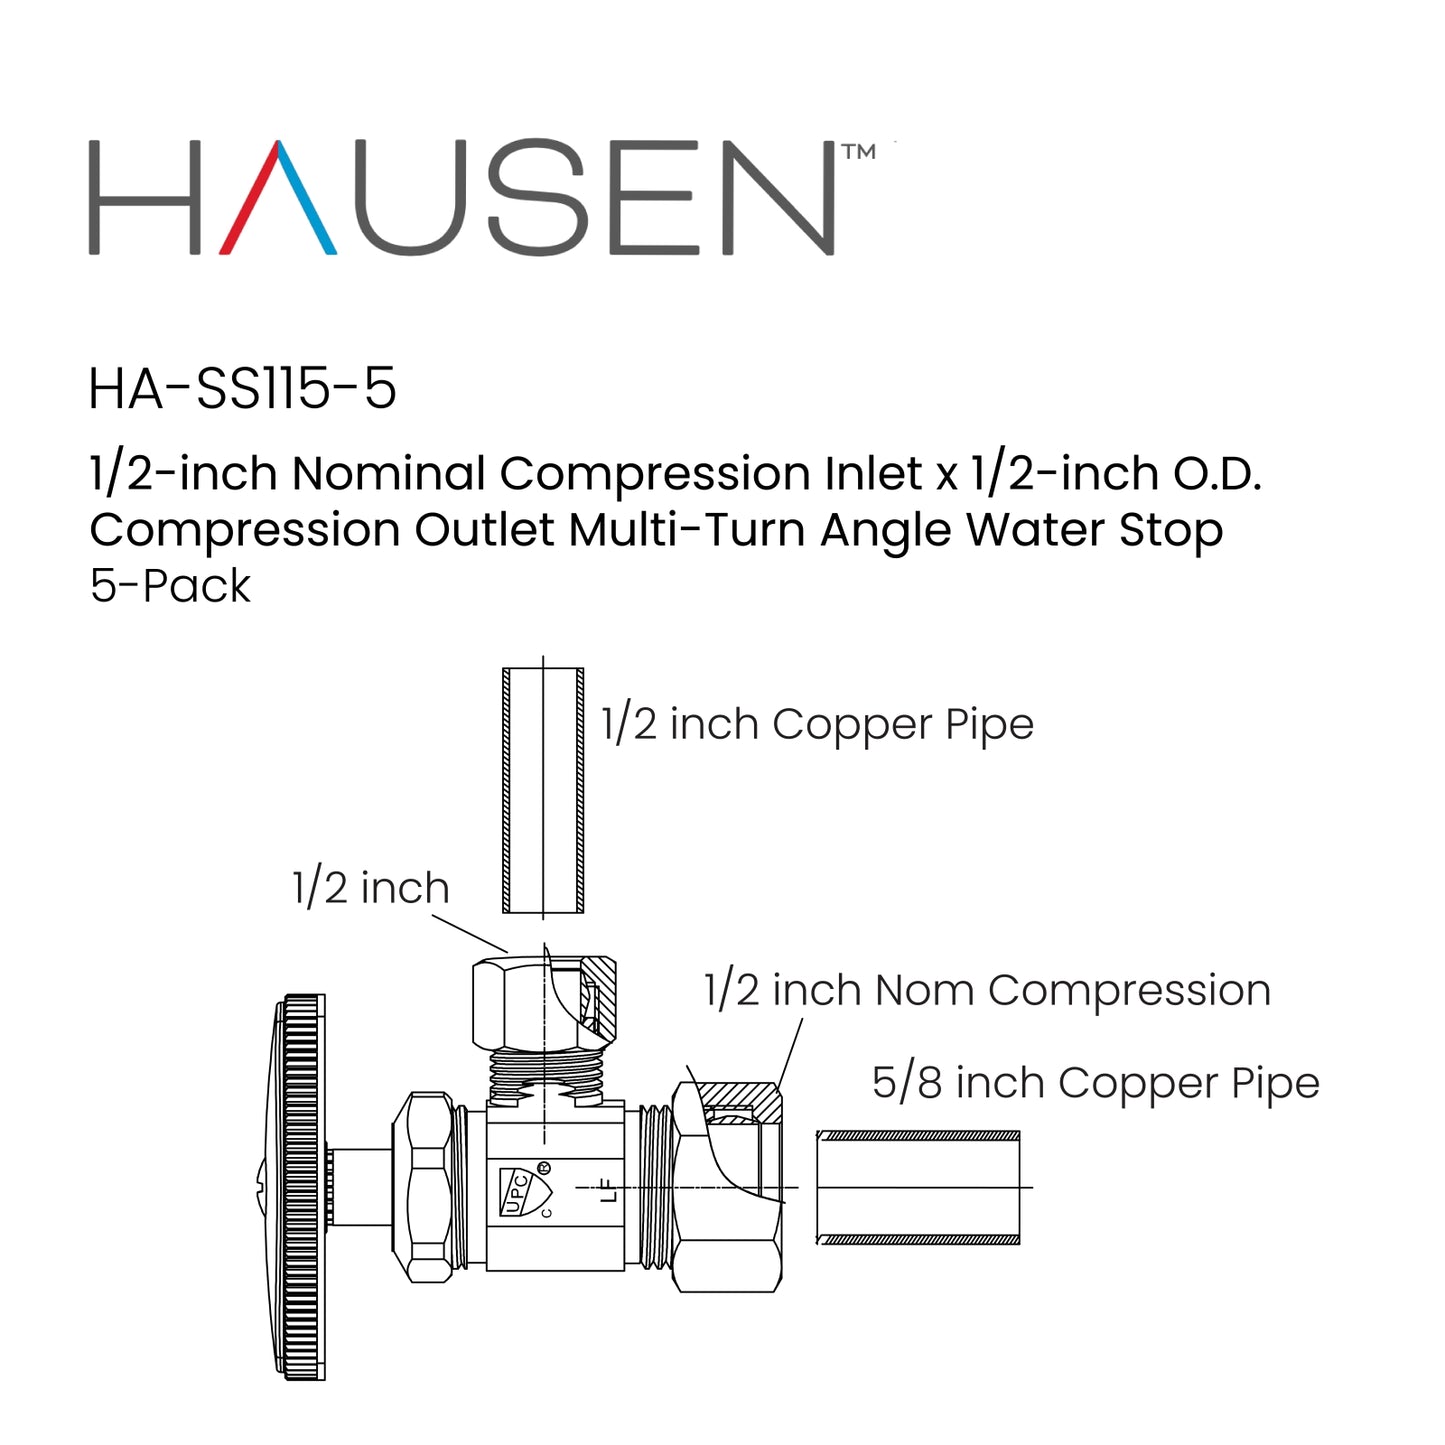 Hausen 1/2-inch Nominal Compression Inlet x 1/2-inch O.D. Compression Outlet Multi-Turn Angle Water Stop; Lead-Free Forged Brass; Chrome-Plated; cUPC/ANSI/NSF Certified; Compatible with Copper Piping, 5-Pack